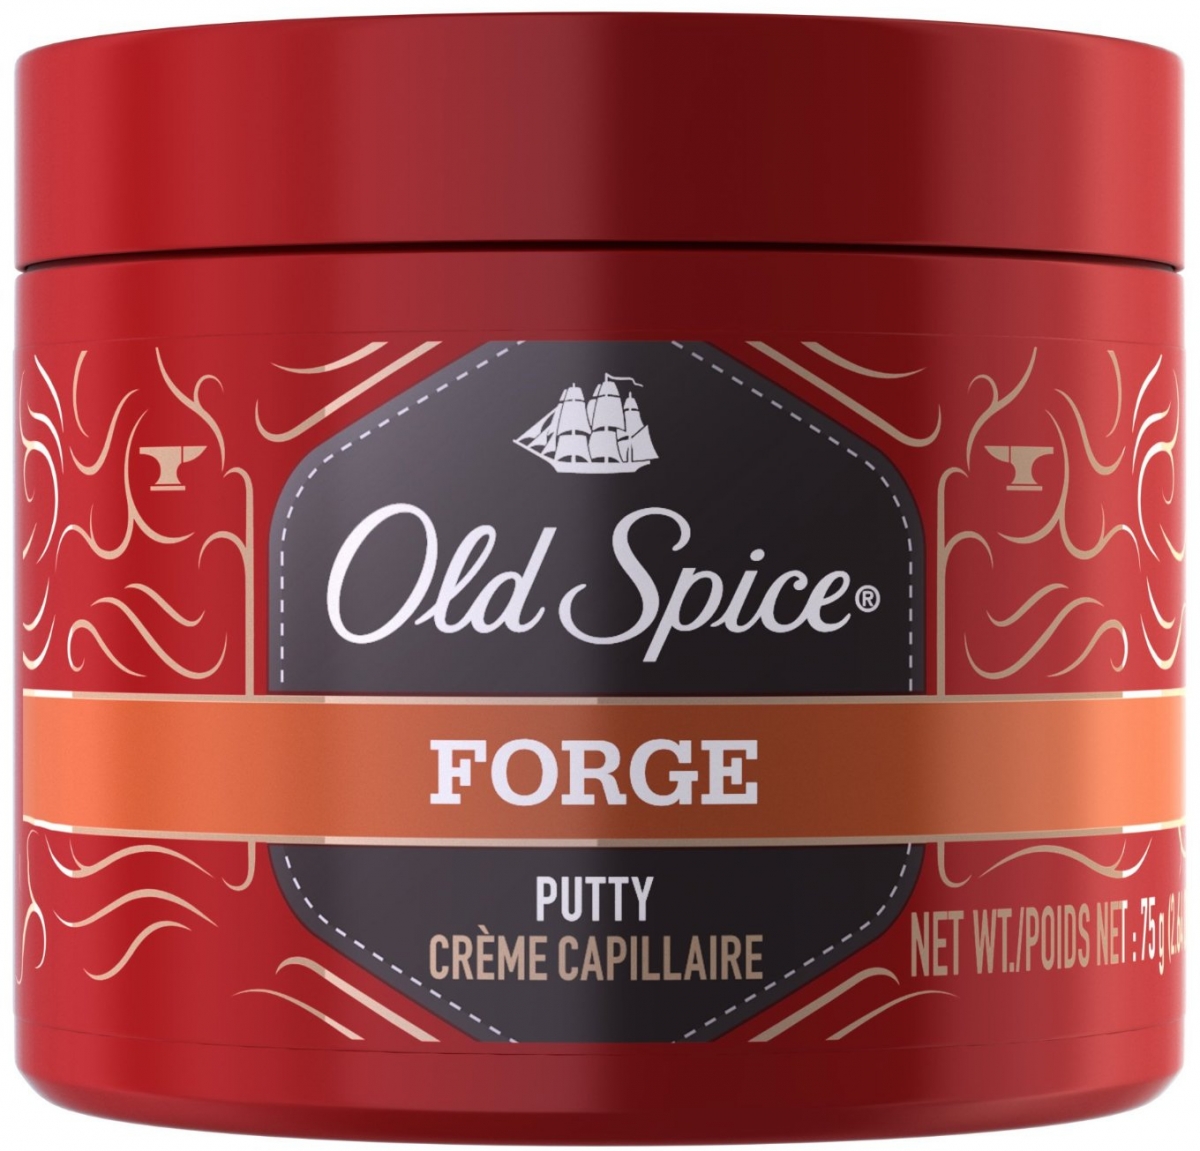 old spice putty